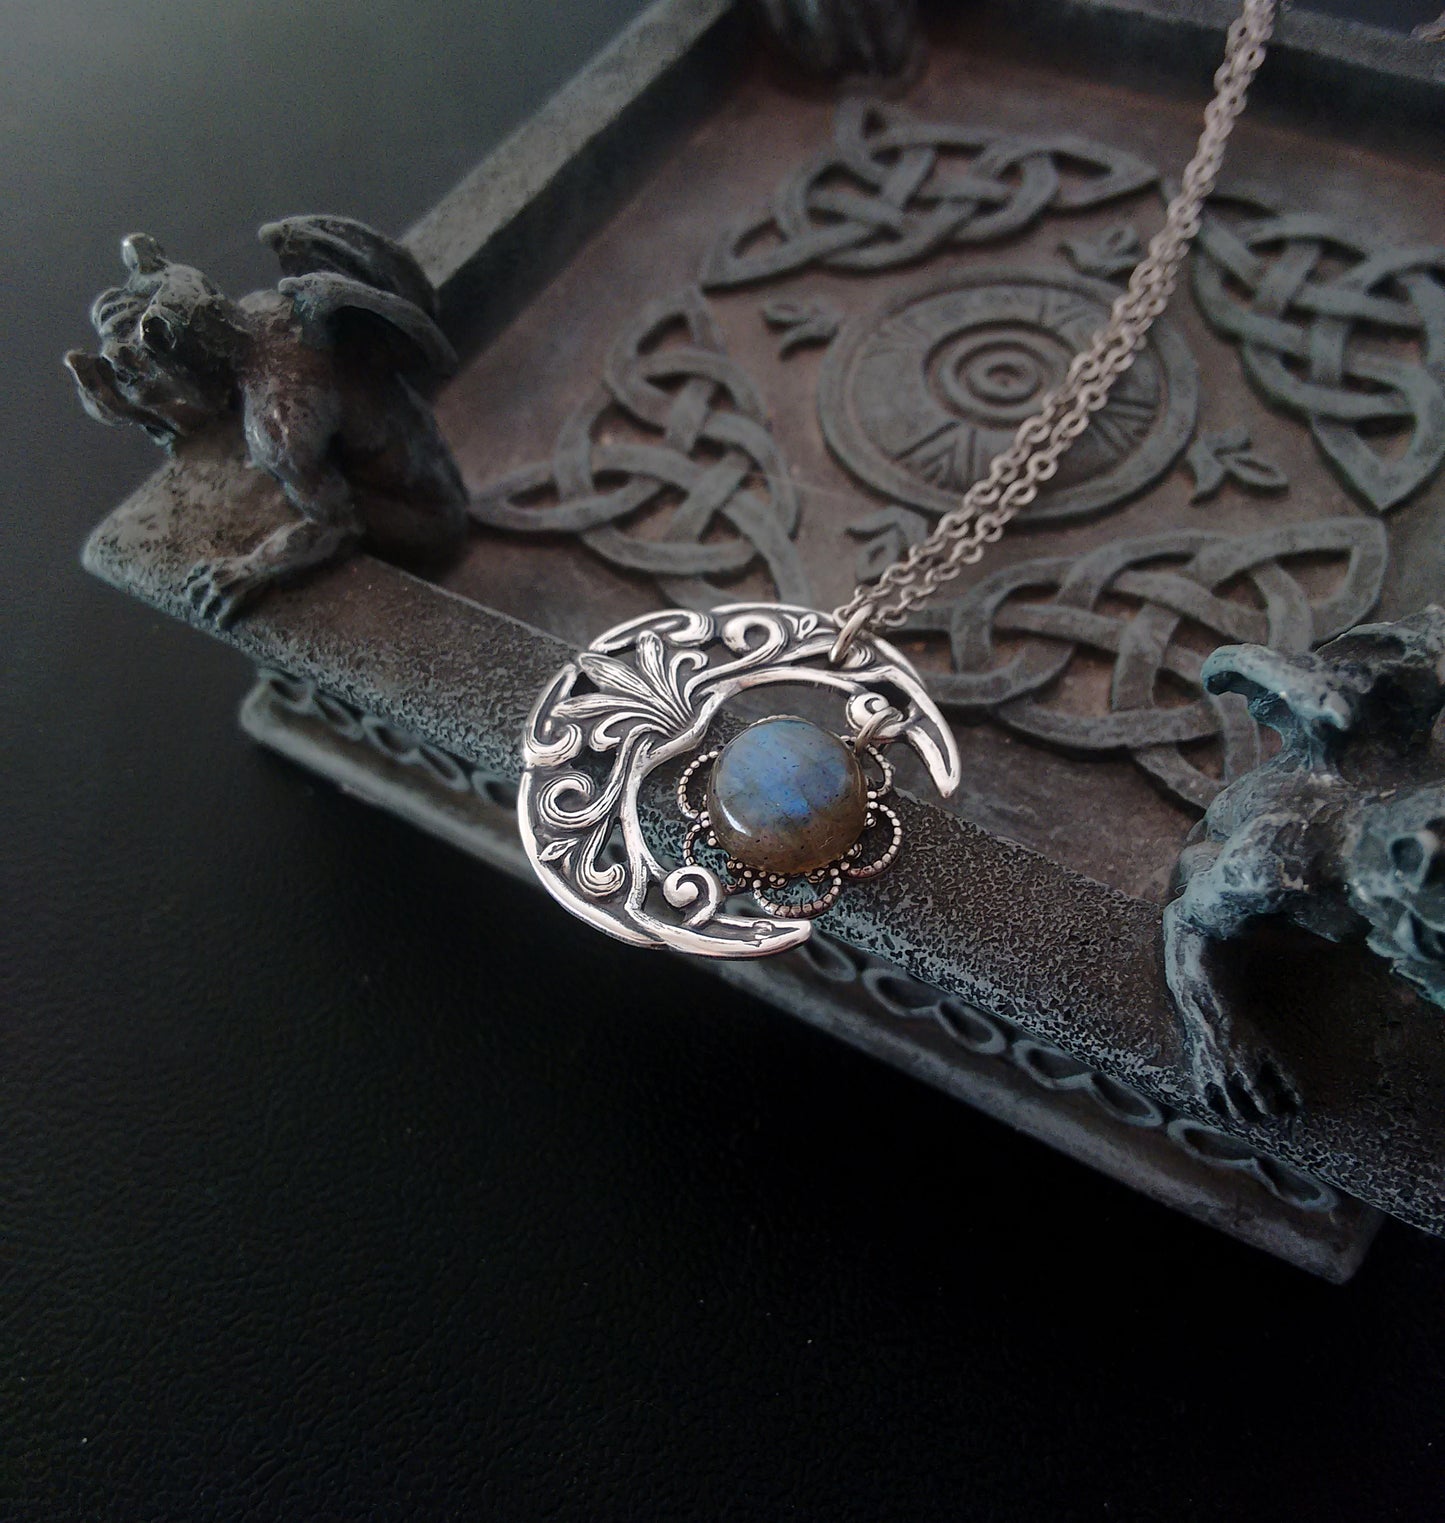 Small Crescent Necklace with Labradorite